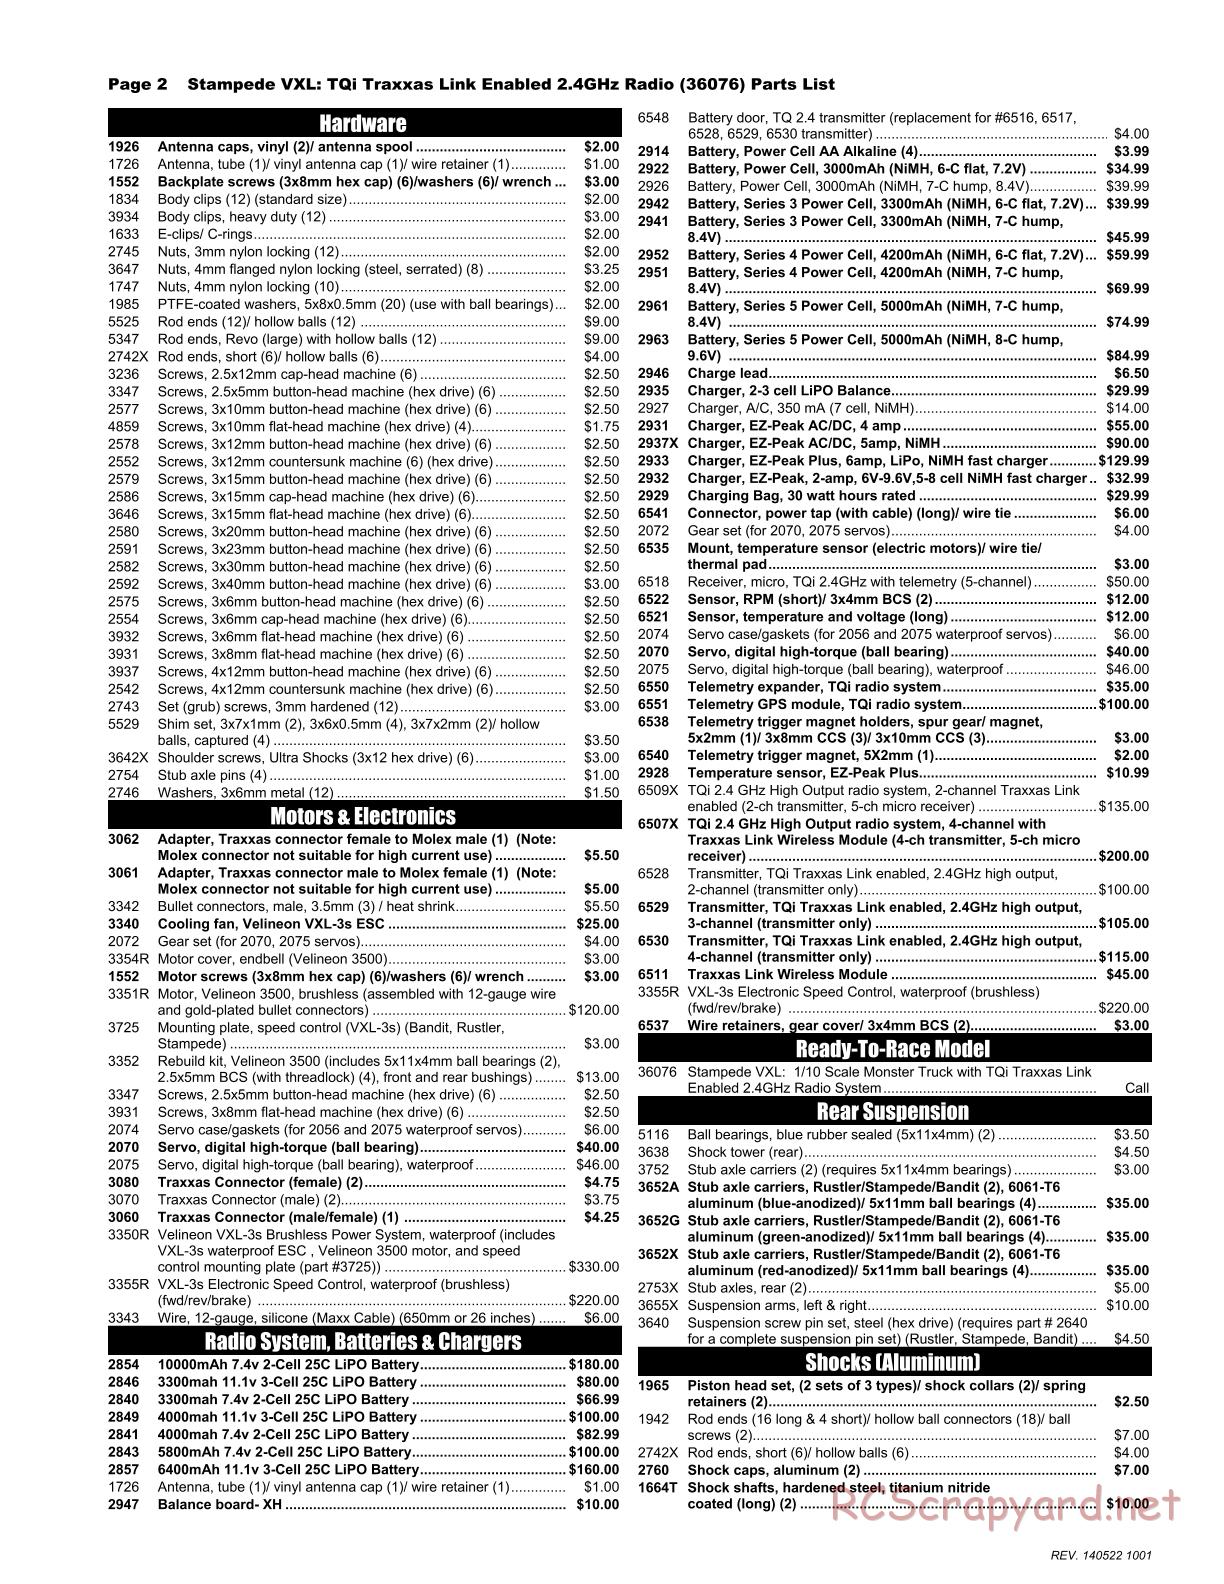 Traxxas - Stampede VXL - Parts List - Page 2